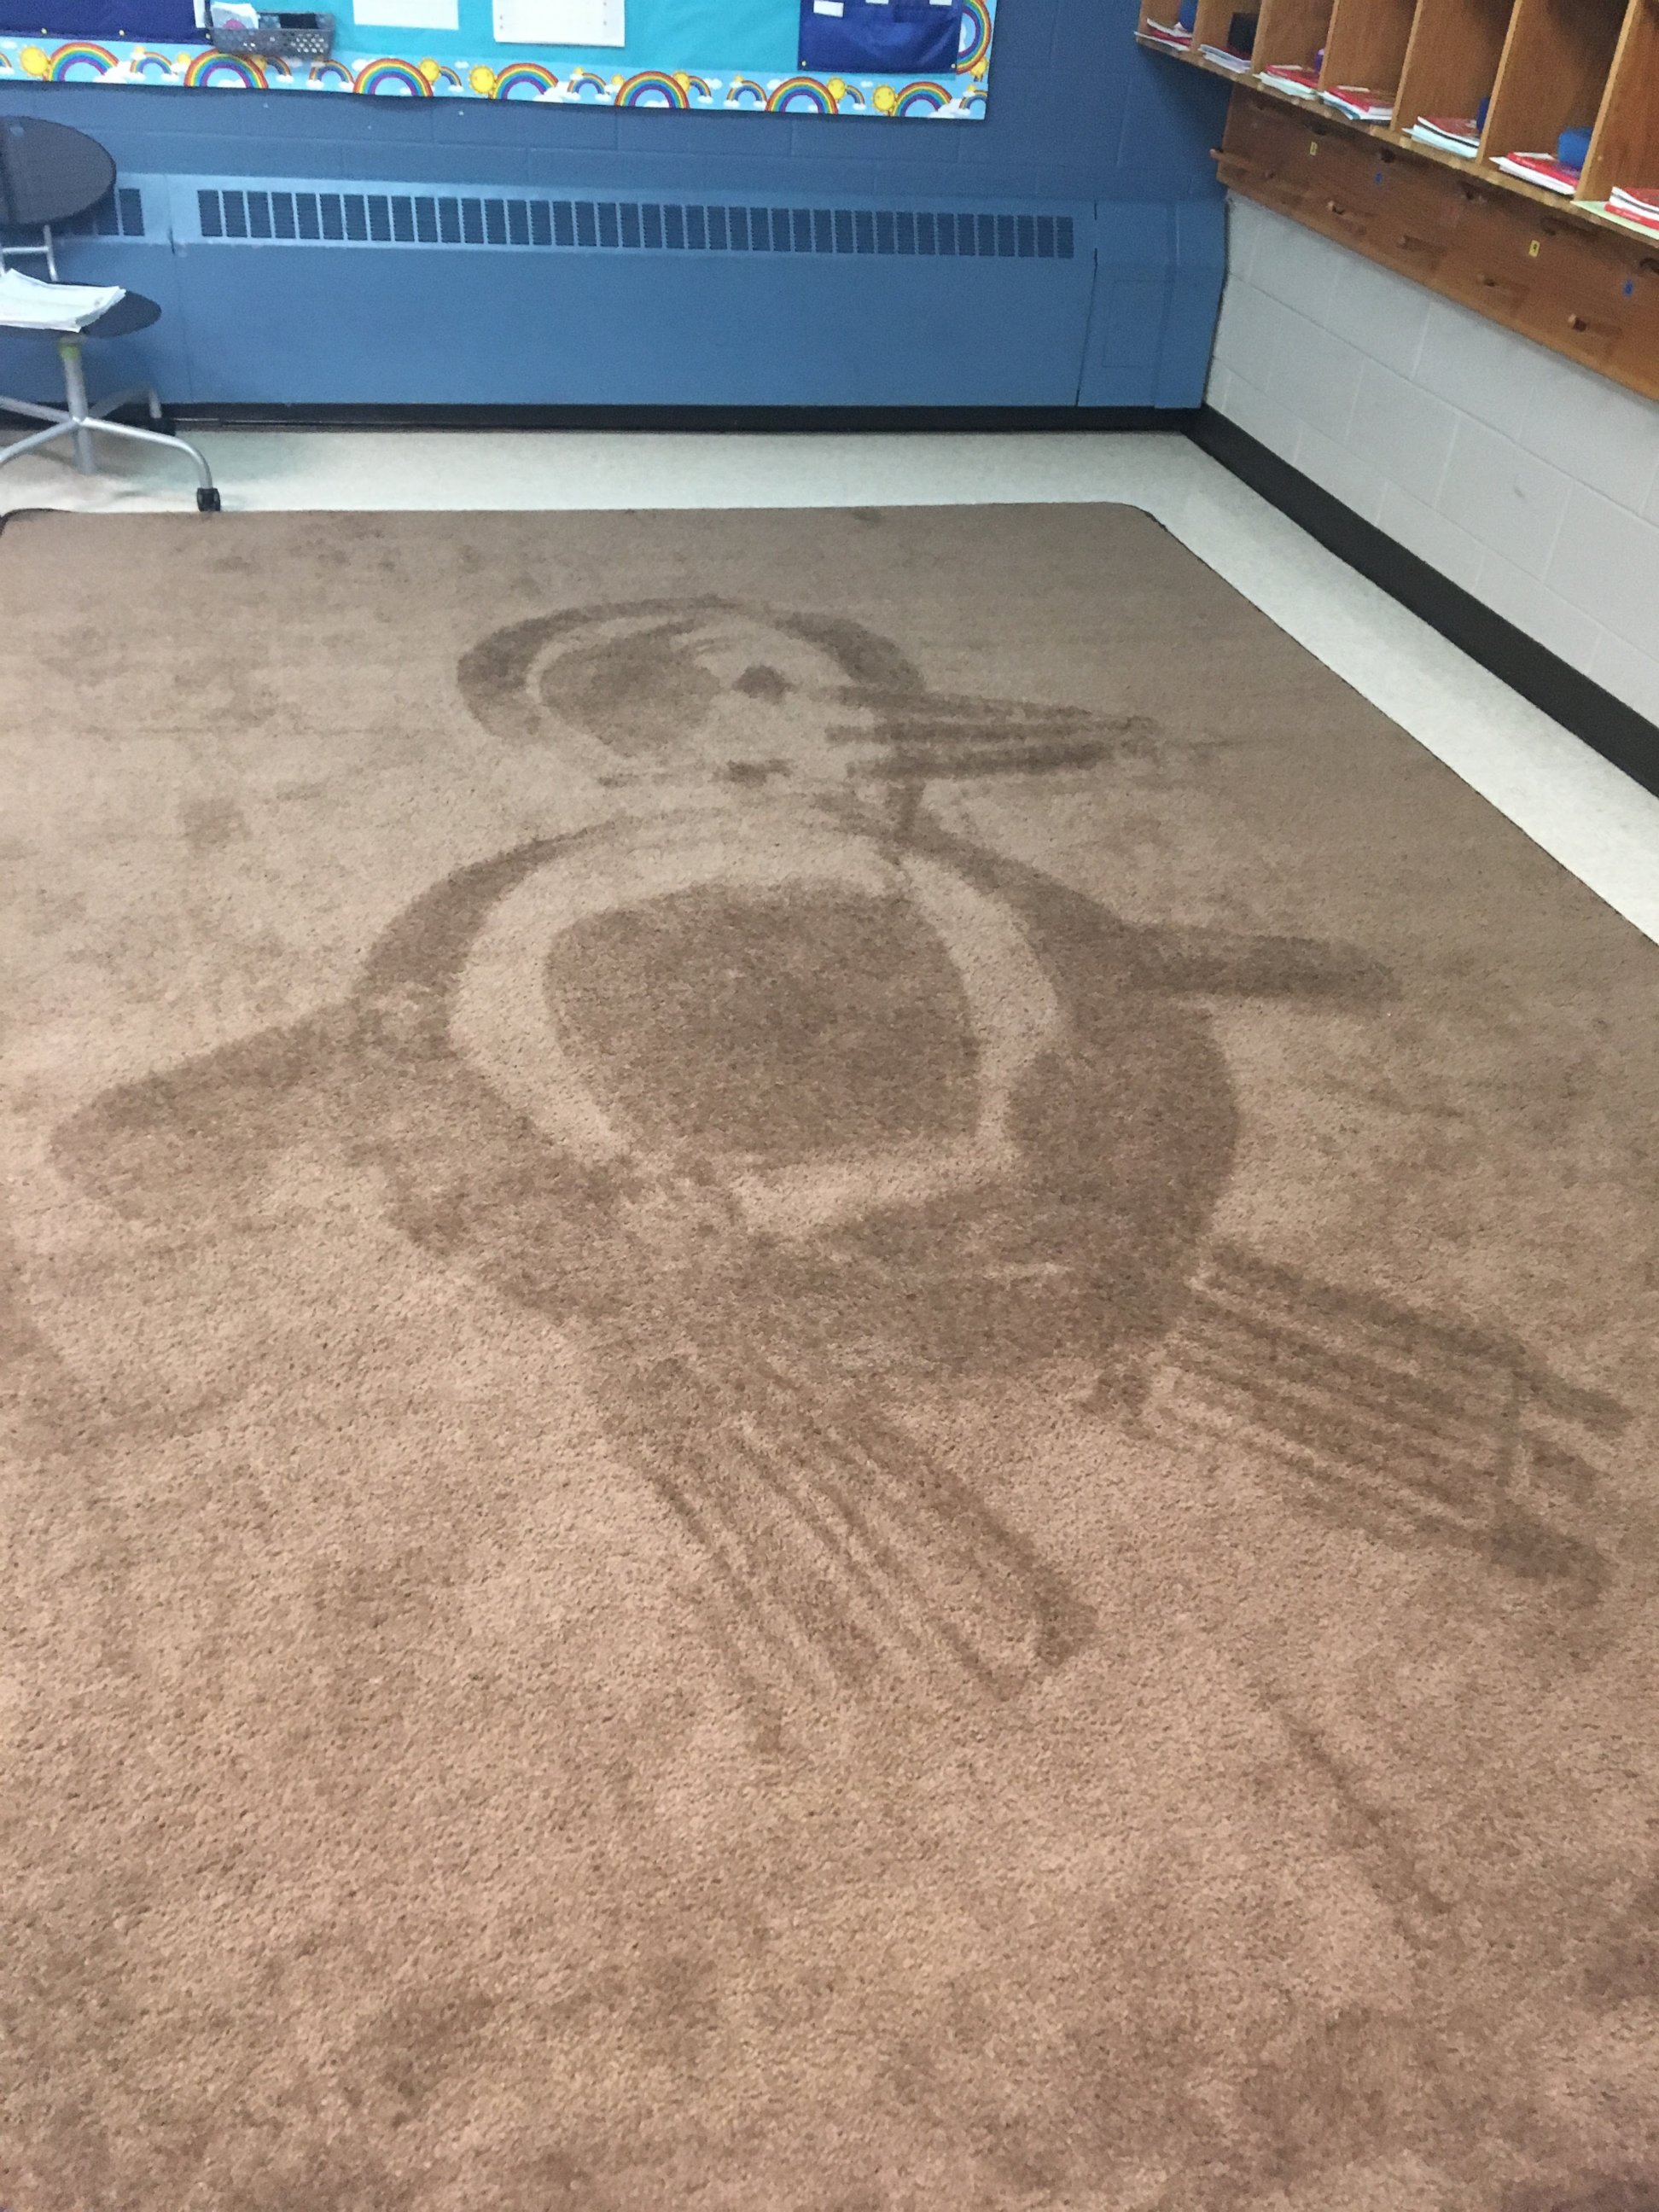 PHOTO: School janitor Ron Munsey vacuums artistic designs into classroom rugs as daily surprise for kids.